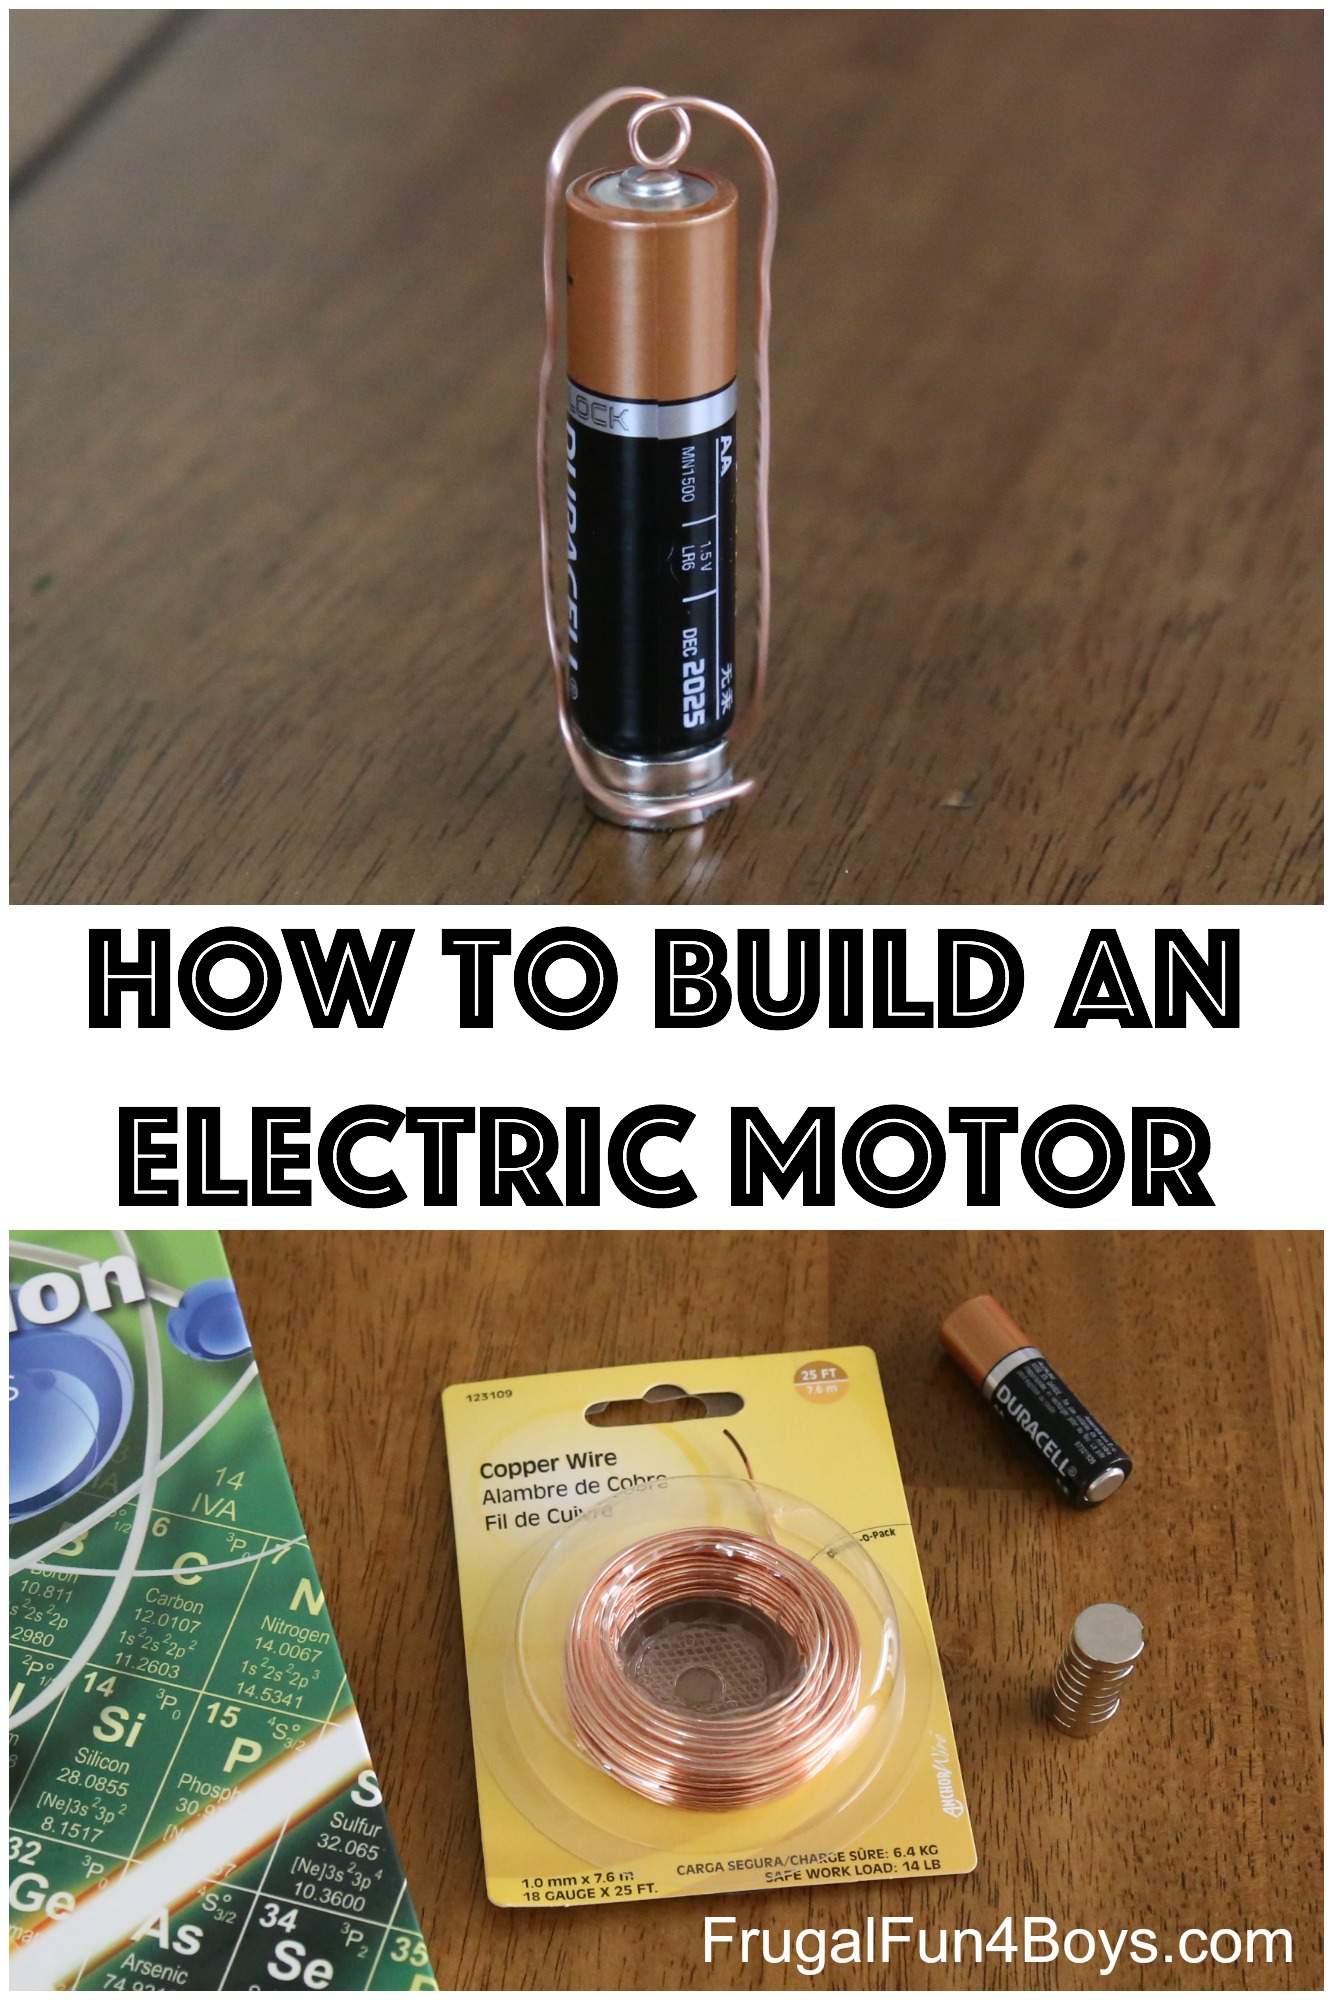 How to Build an Electric Motor - Electricity Project for Kids